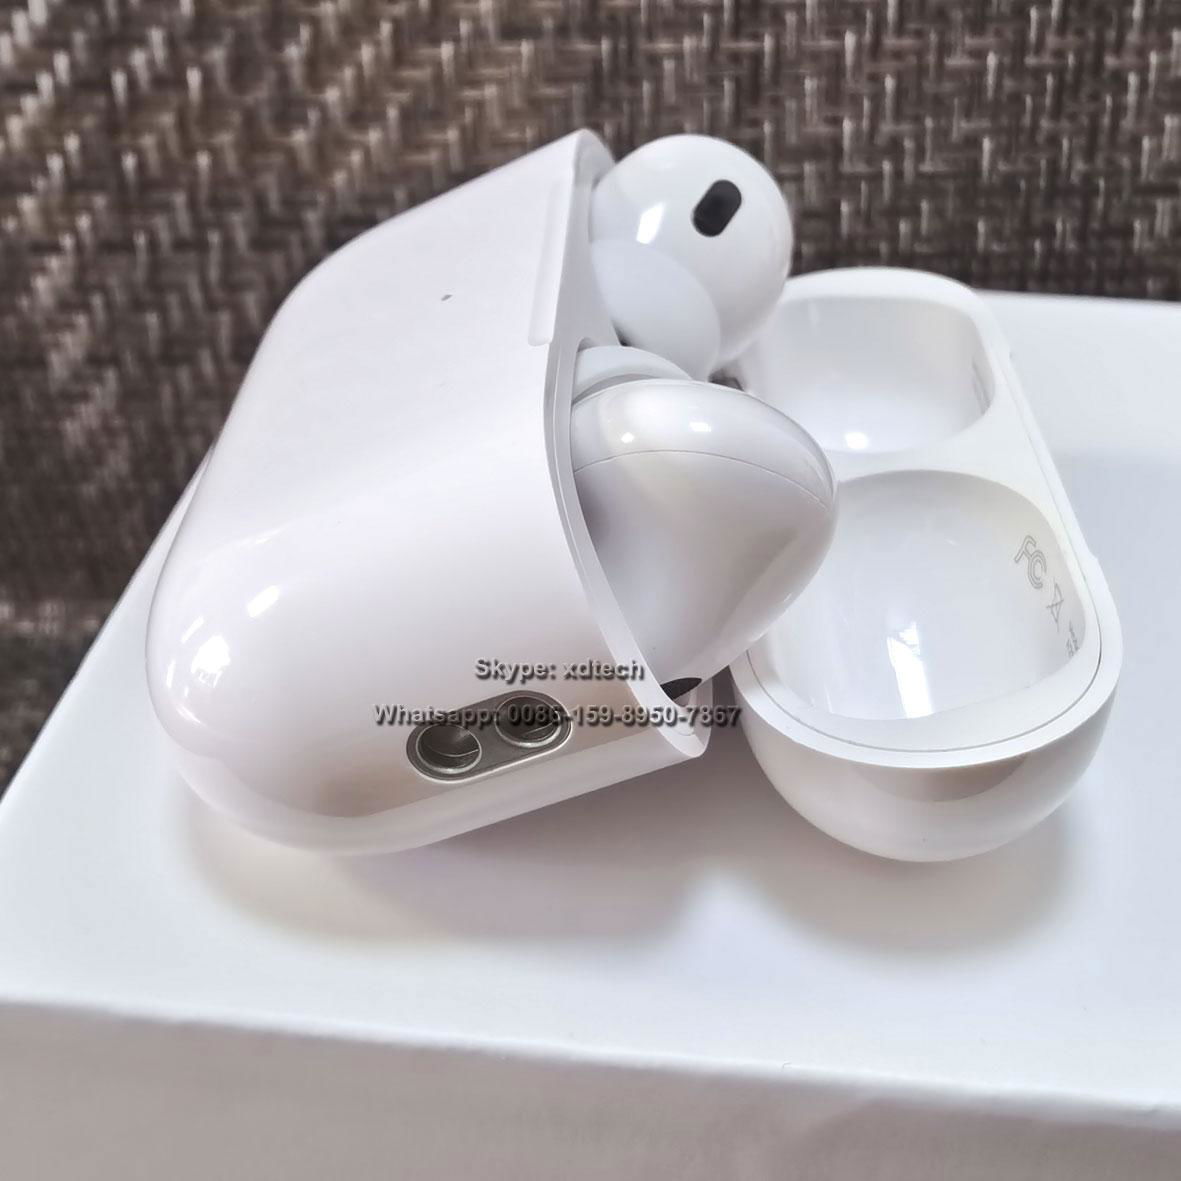 Latest Apple AirPods Pro 2nd Gen, 1:1 Clone AirPods 5